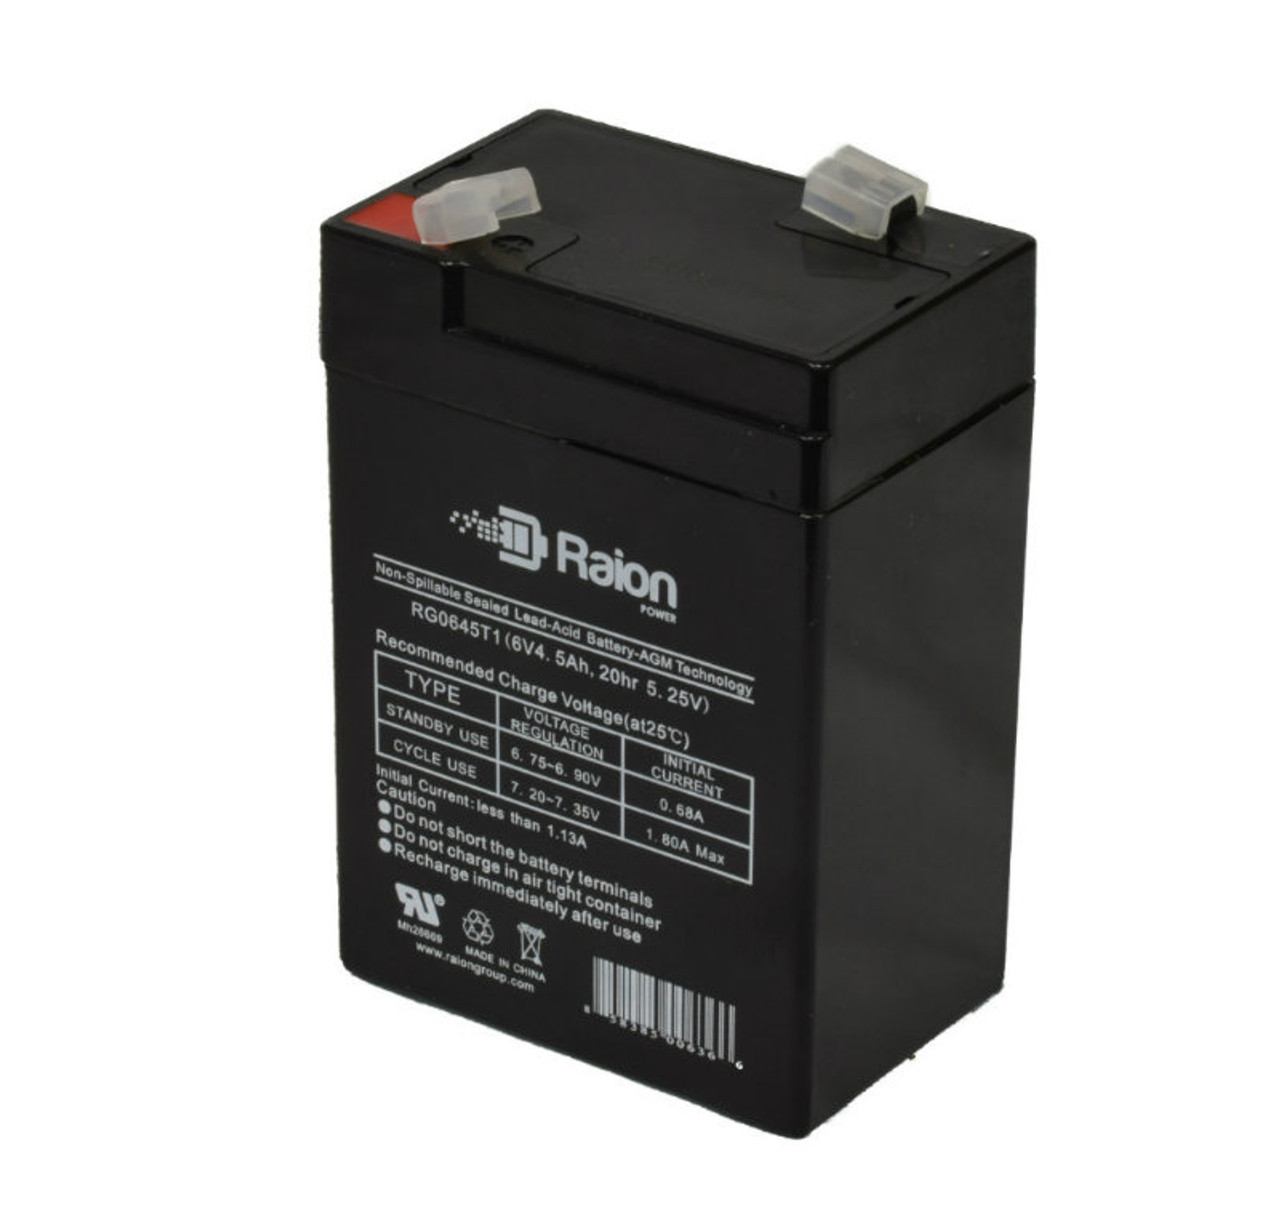 Raion Power RG0645T1 6V 4.5Ah Replacement Battery Cartridge for Power Source WP4.5-6 (91-040)